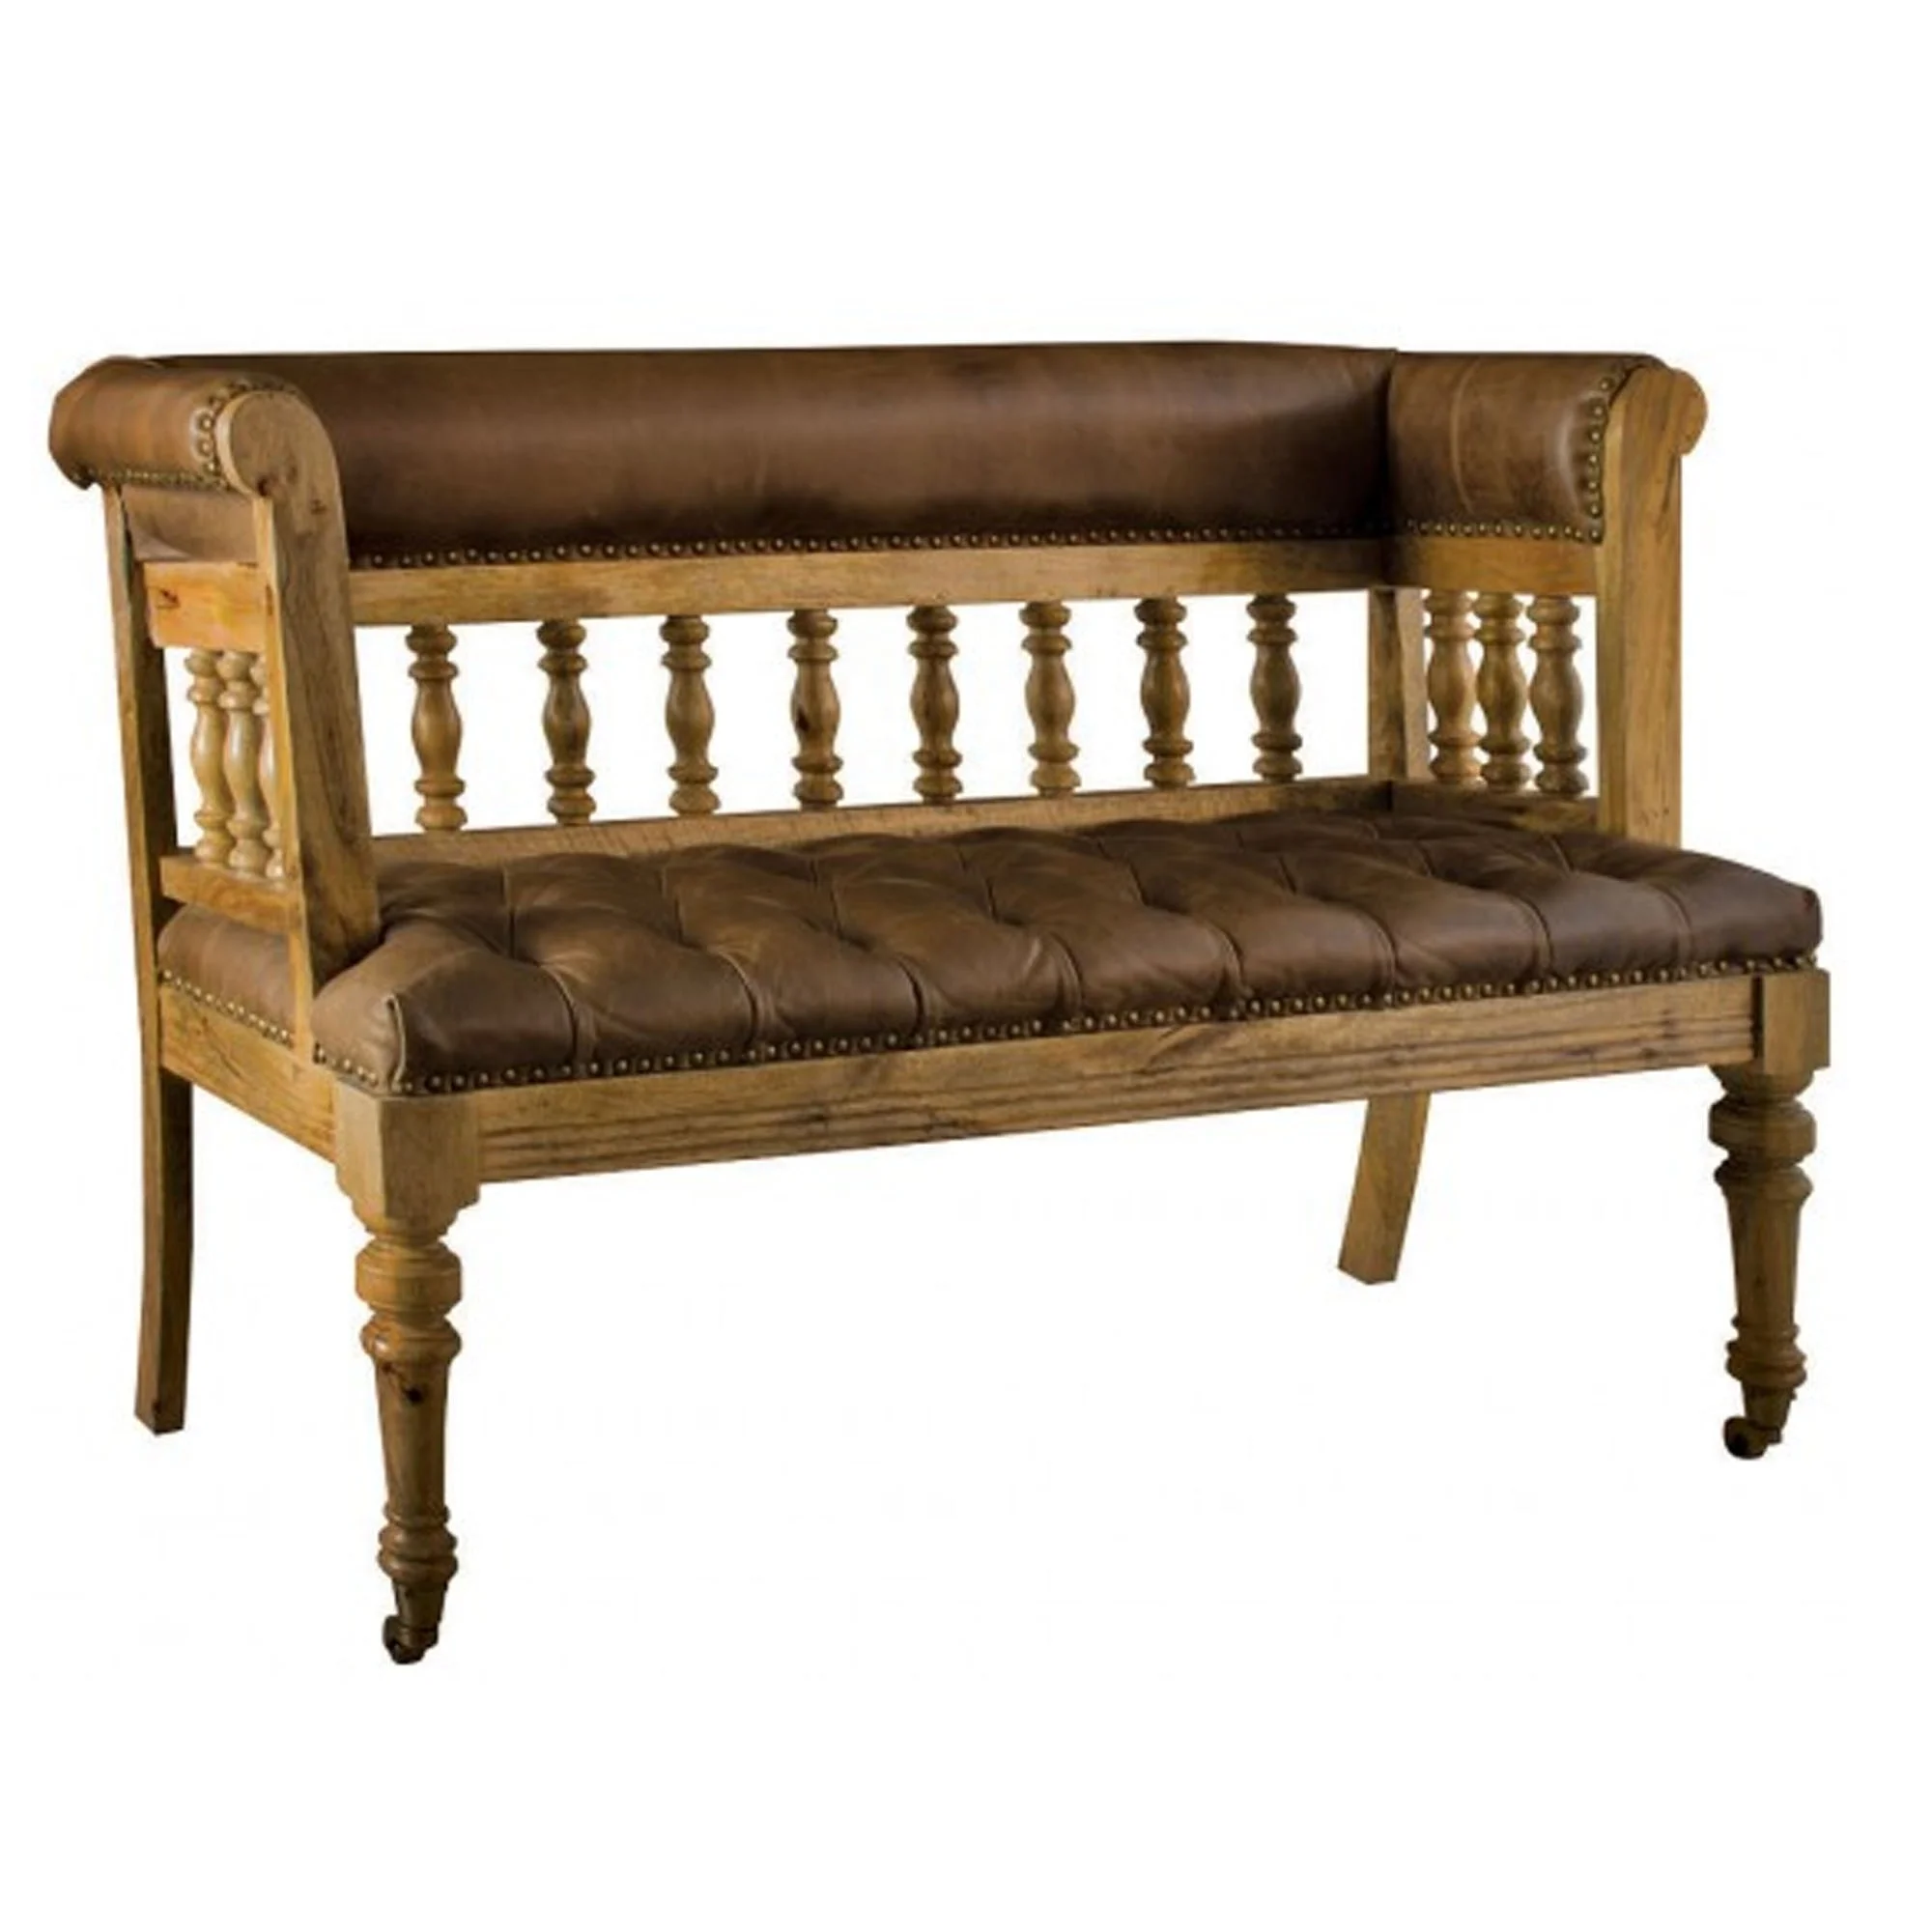 Traditional Antique India Leather Bench